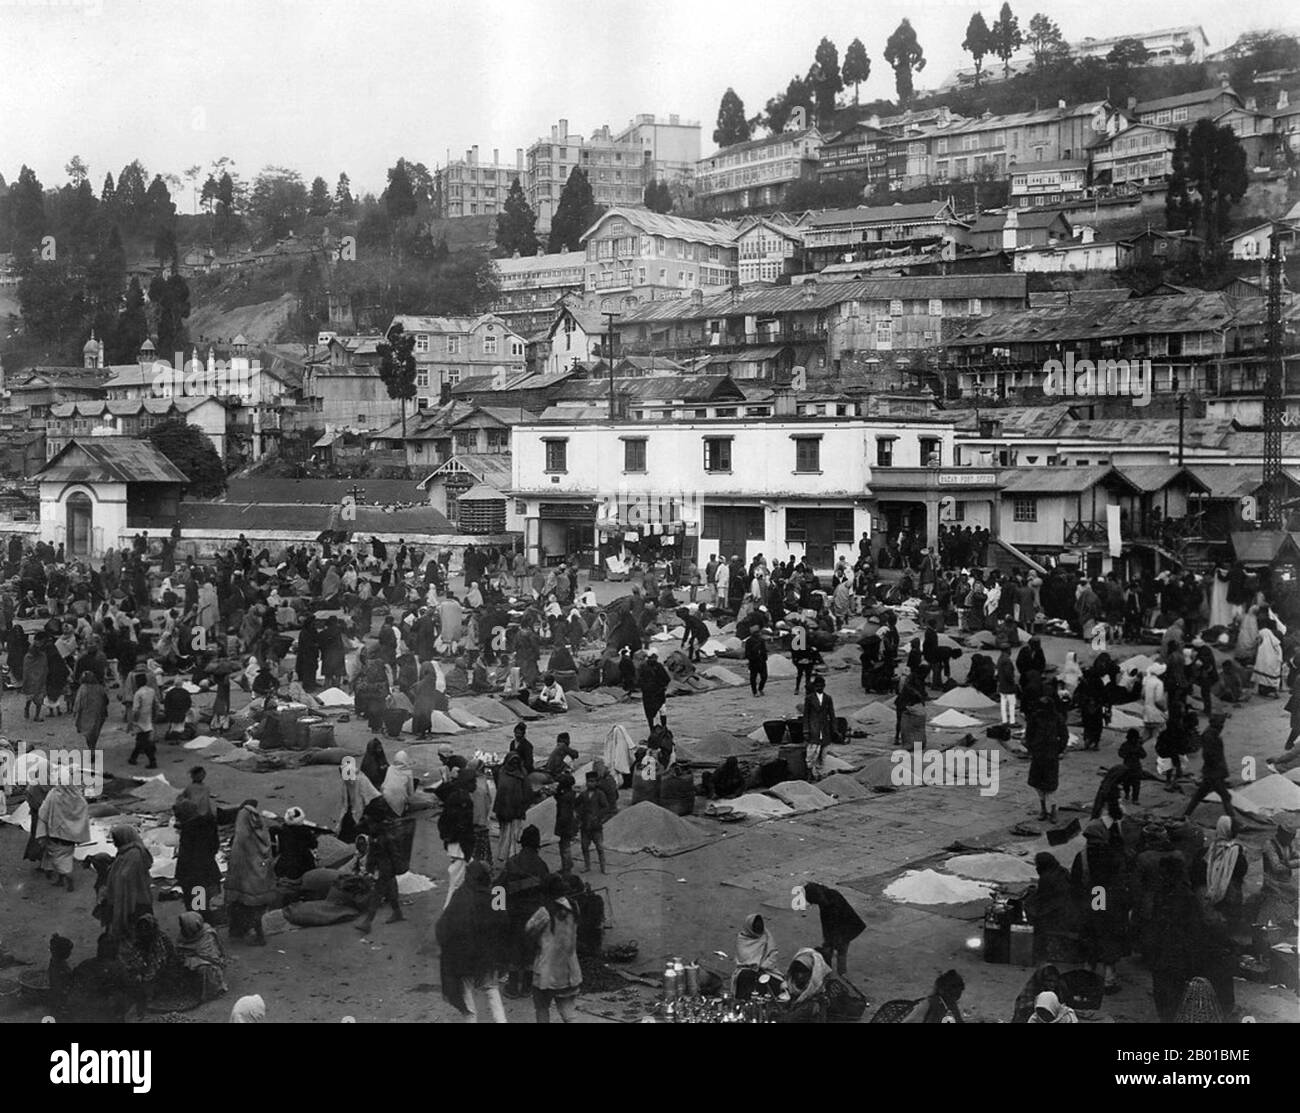 India/Sikkim: The central marketplace in Gangtok, capital of Sikkim, c. 1935.  Gangtok is the capital and largest town of the Indian state of Sikkim. It is located in the Shivalik Hills of the eastern Himalayan range, at an altitude of 1,437 metres (4,715 ft). The town has a population of thirty thousand belonging to different ethnicities including Nepalis, Lepchas and Bhutia.  Gangtok rose to prominence as a popular Buddhist pilgrimage site after the construction of the Enchey Monastery in 1840. In 1894, the ruling Sikkimese Chogyal, Thutob Namgyal, transferred the capital to Gangtok. Stock Photo